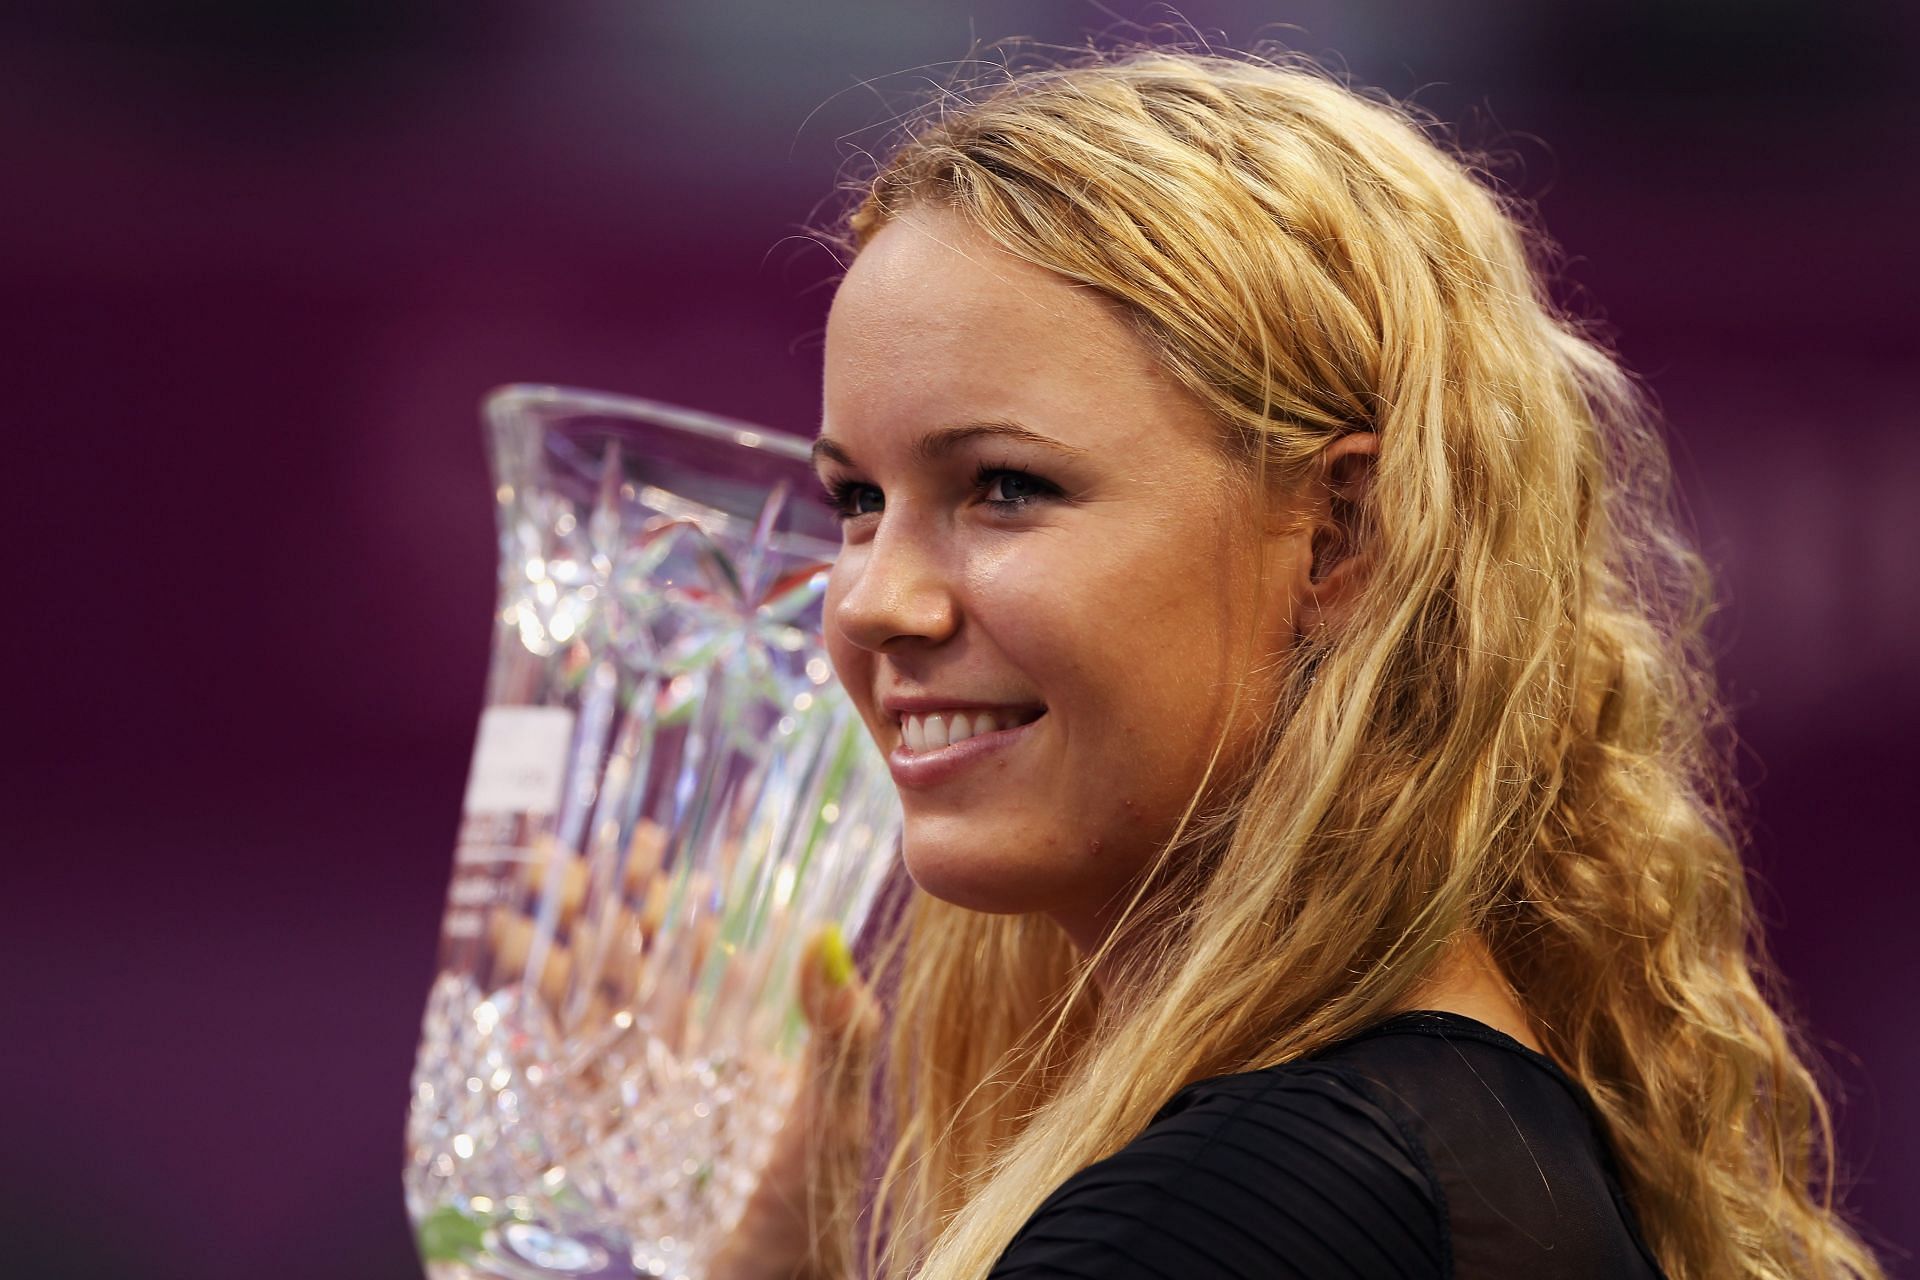 Caroline Wozniacki smiles as she holds the year-end No. 1 trophy at the WTA Championships on October 29, 2010 in Doha.